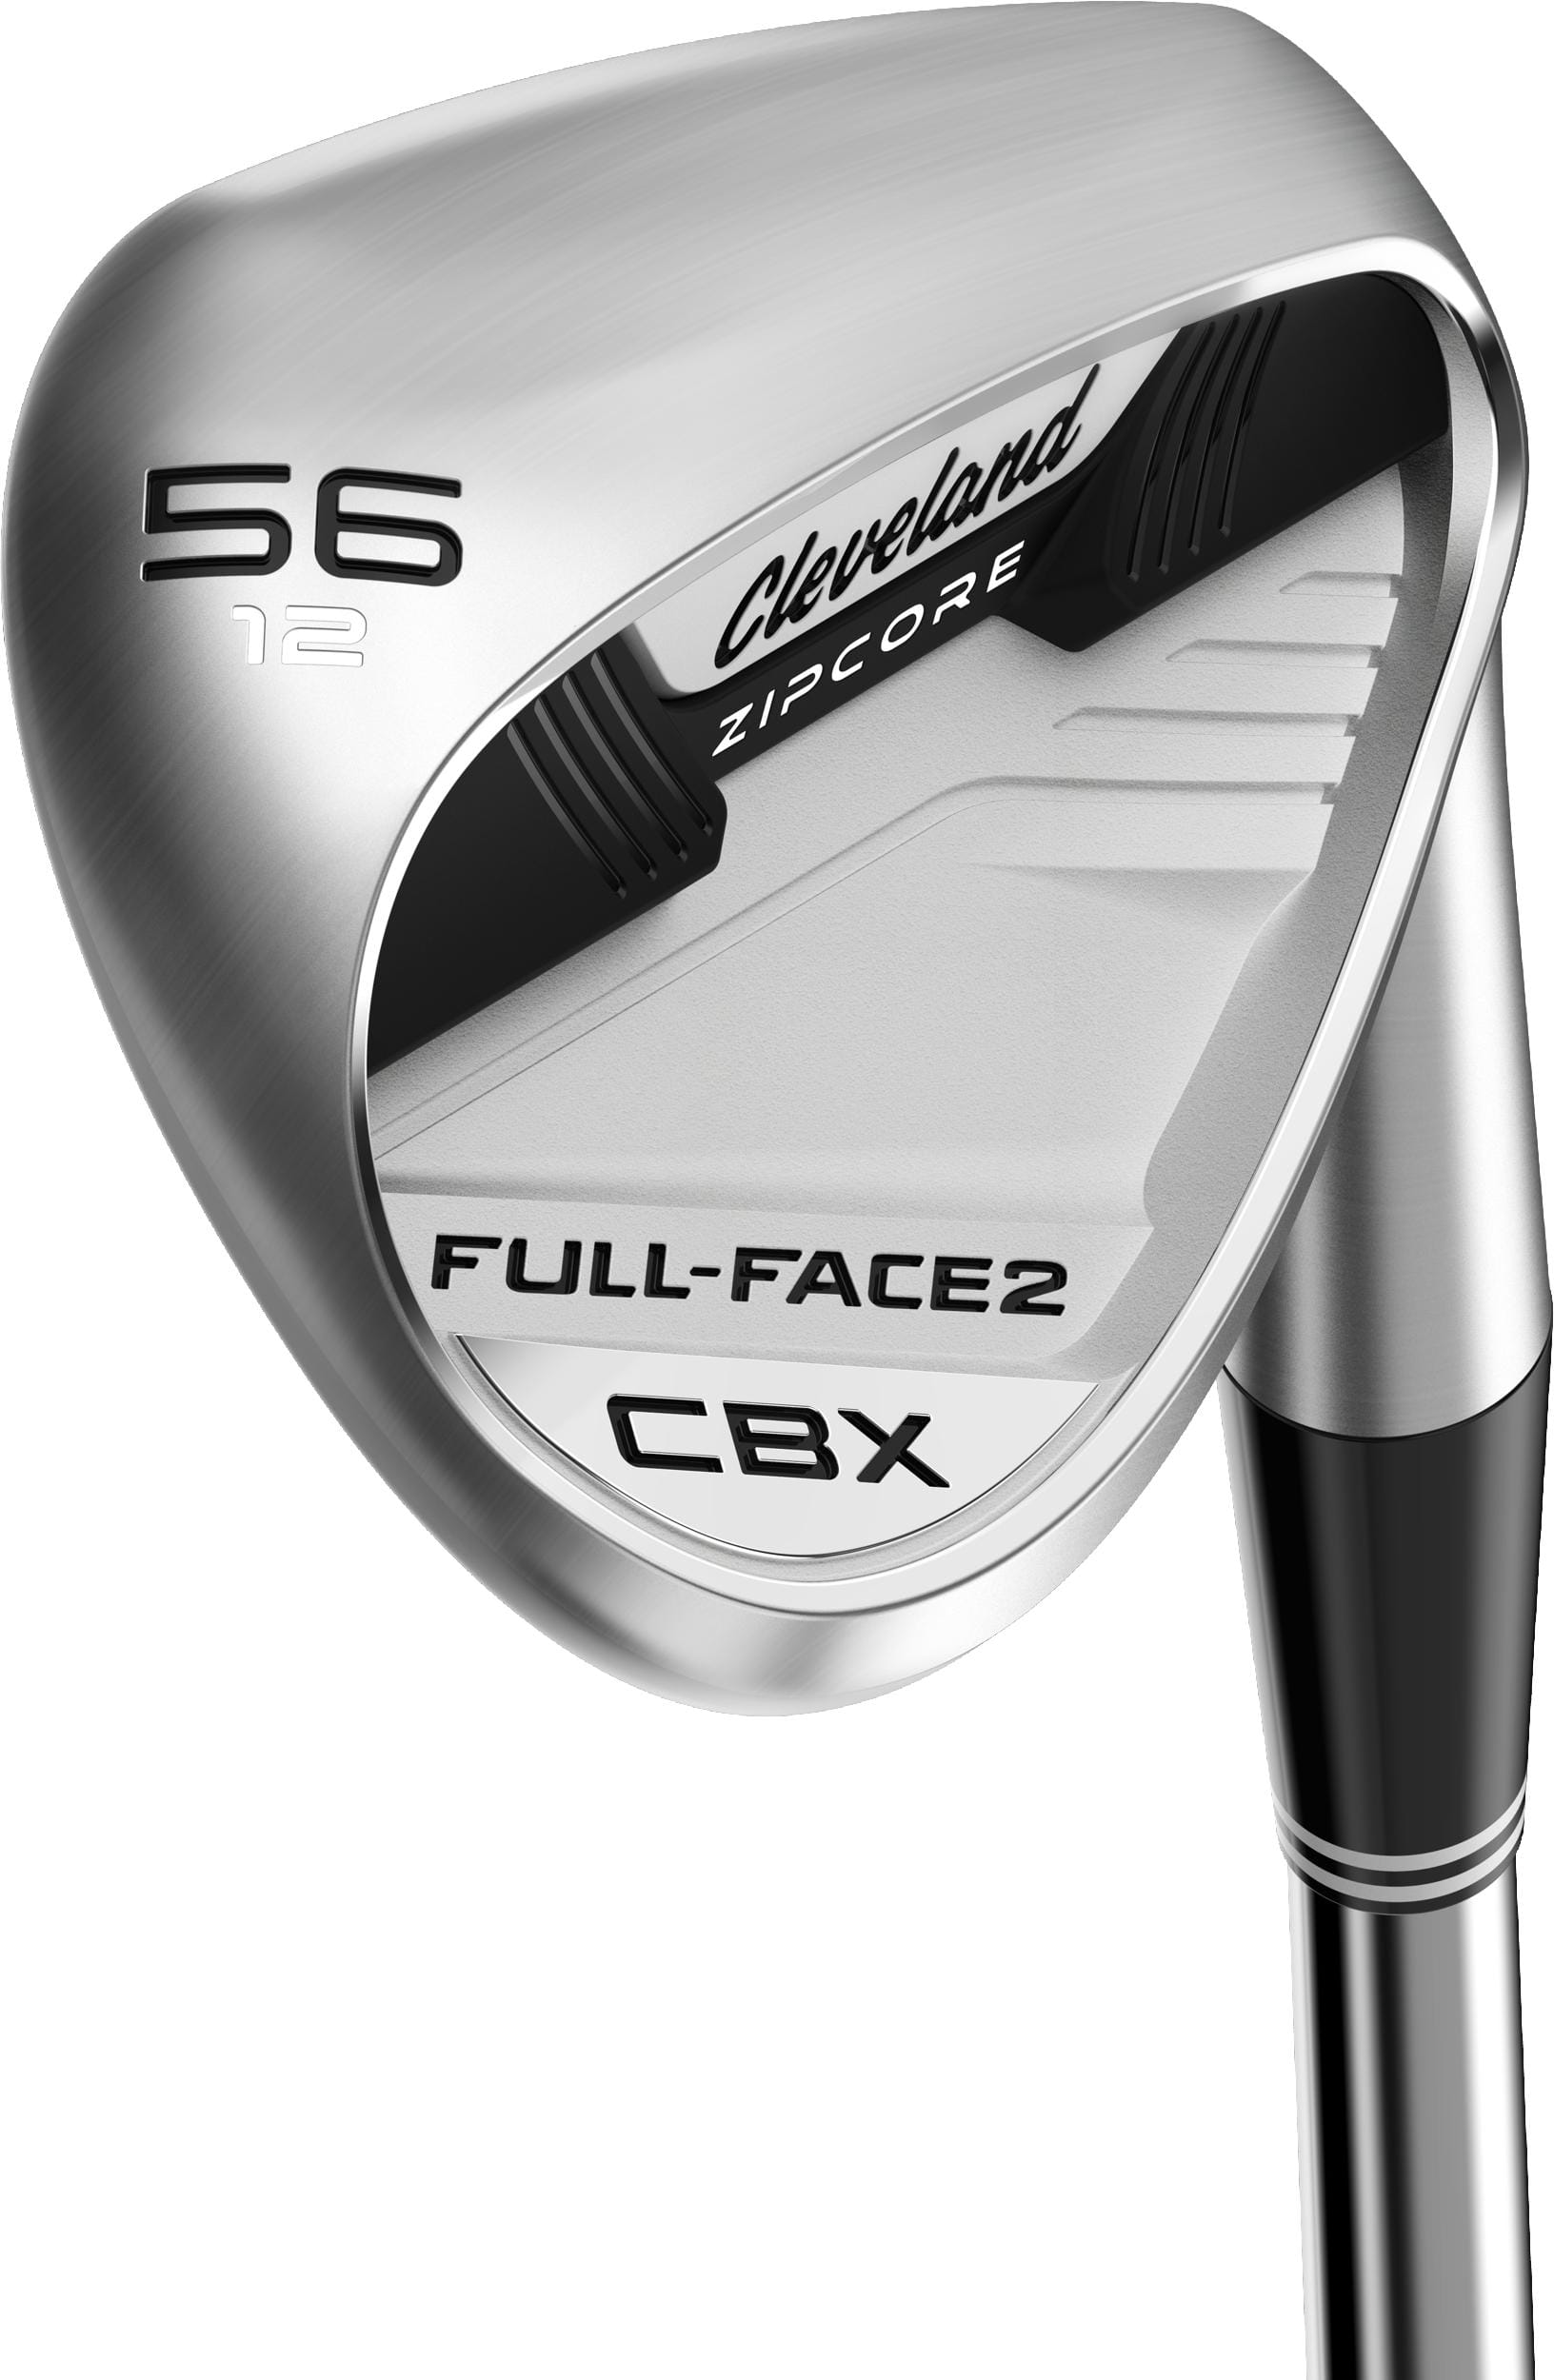 Cleveland CBX Full-Face 2 Tour Satin Wedge